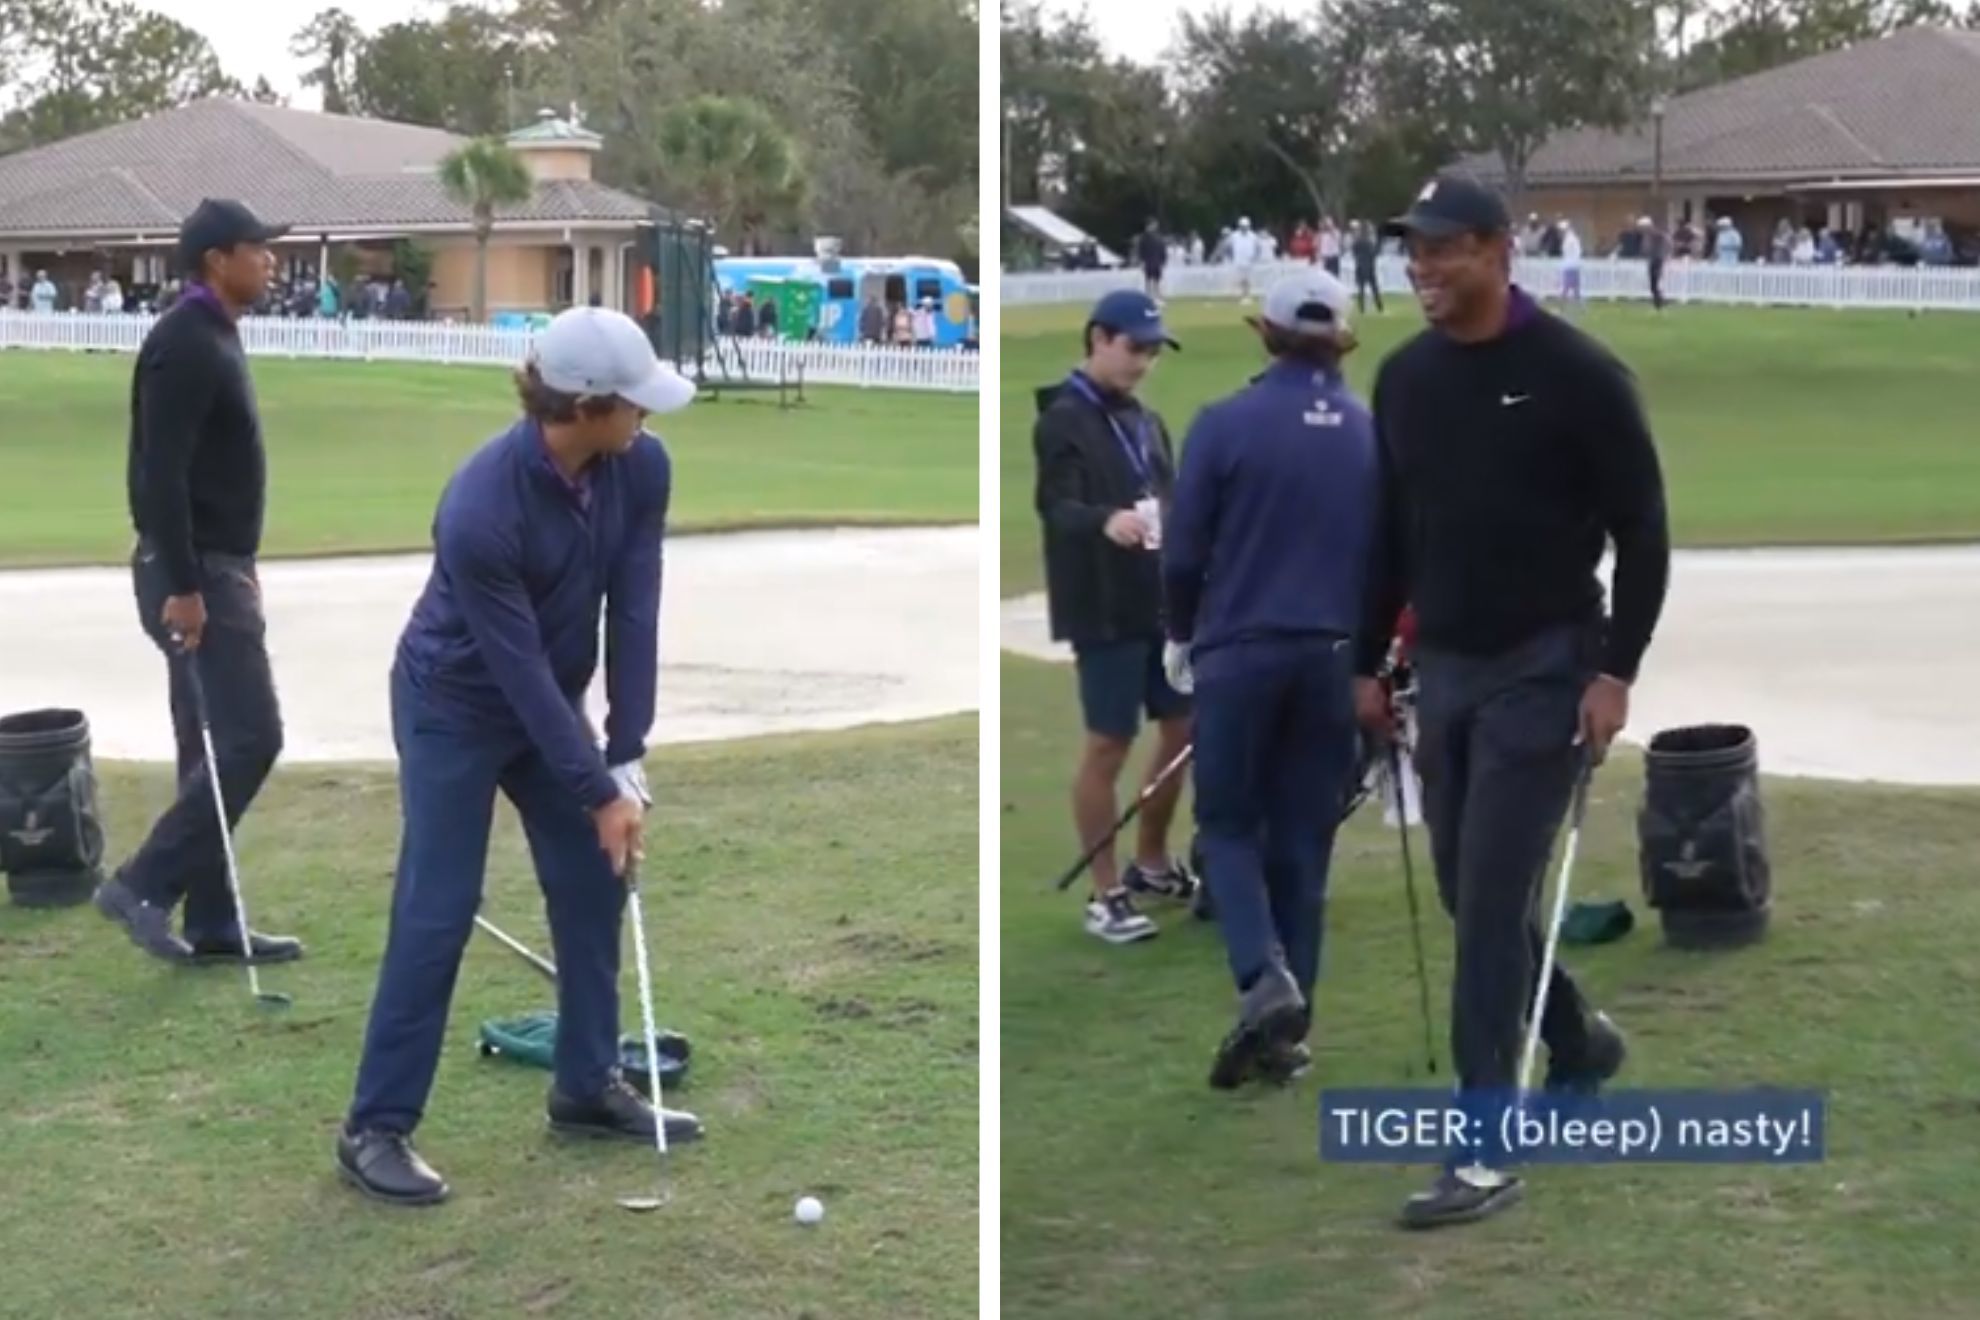 Charlie Woods flop shot makes his father Tiger Woods proudly quit: F---ing nasty